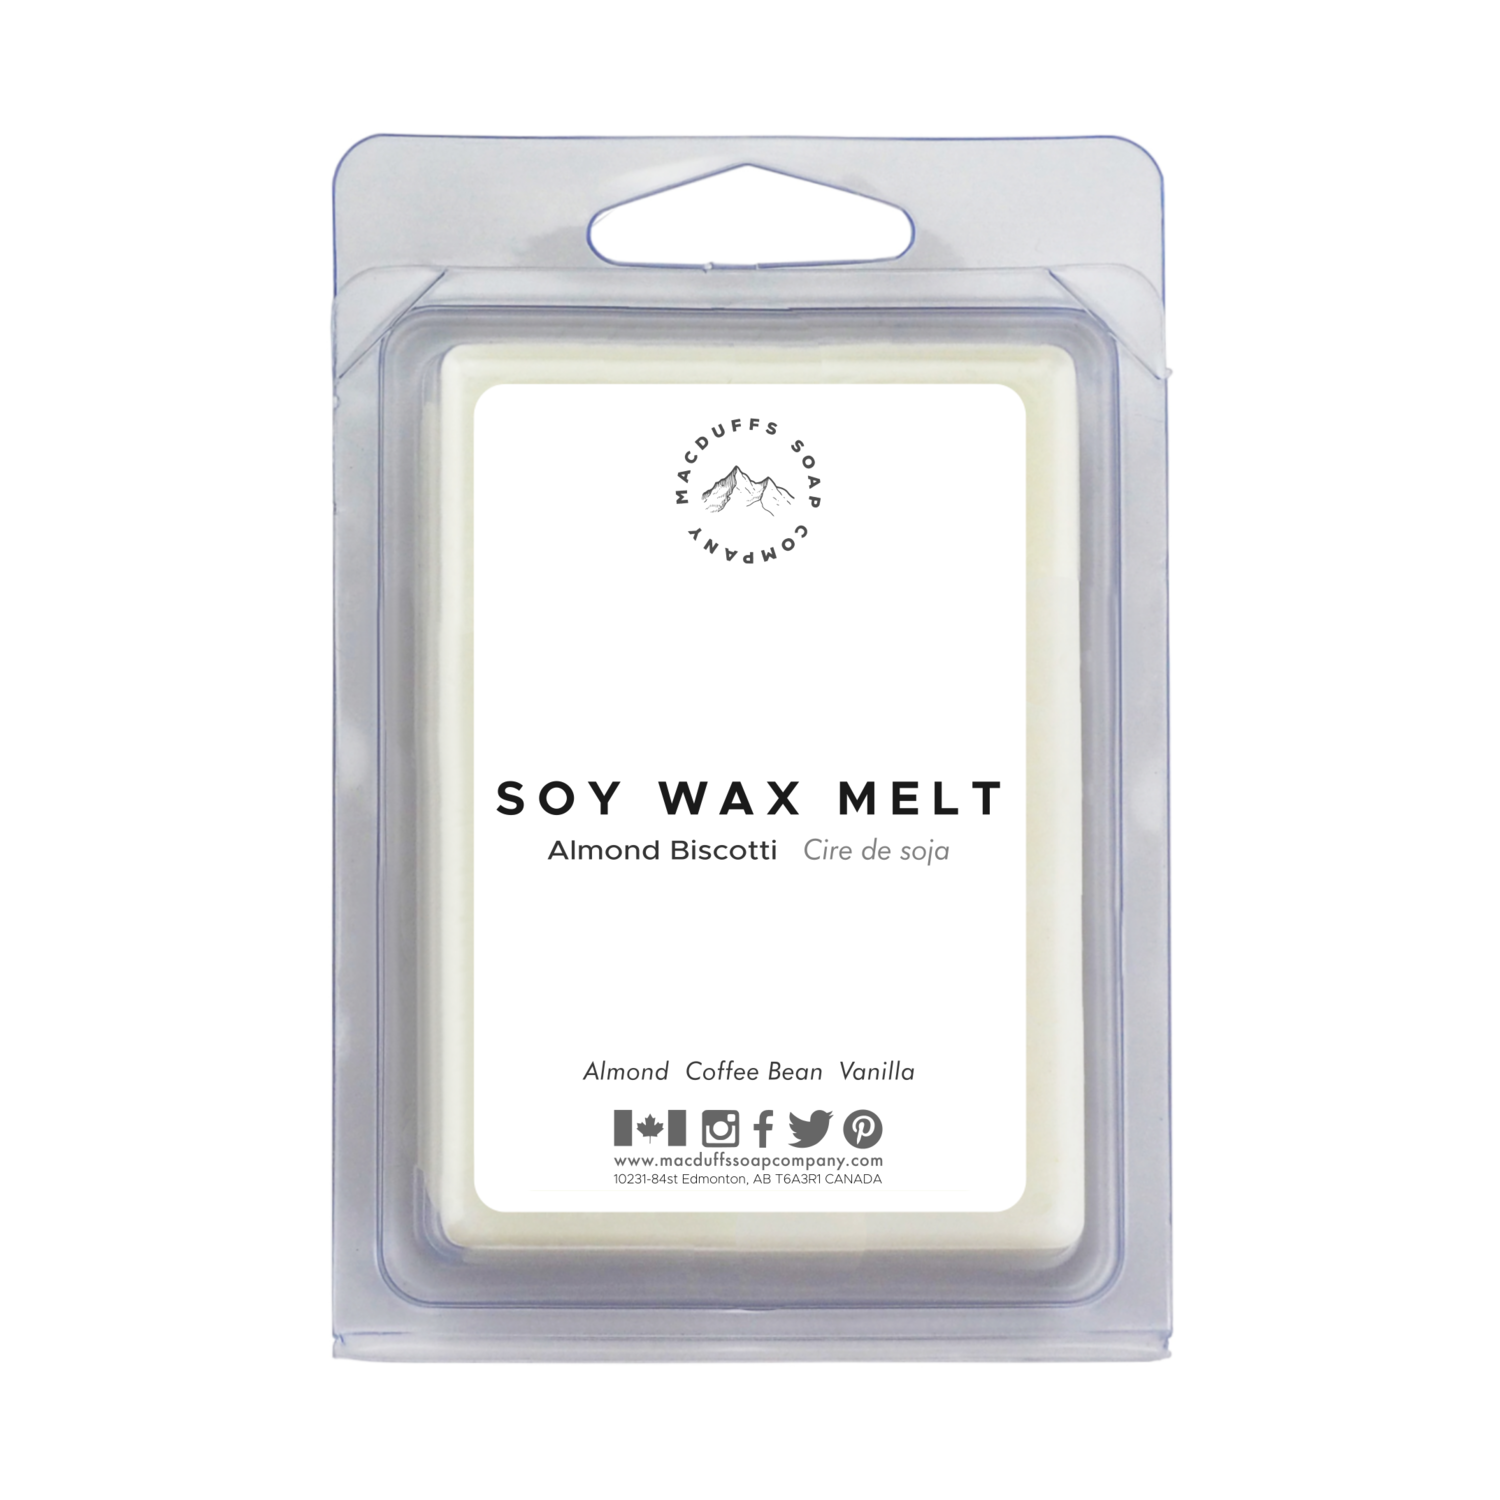 Almond Biscotti Soy Wax Melt (Wickless Candle)